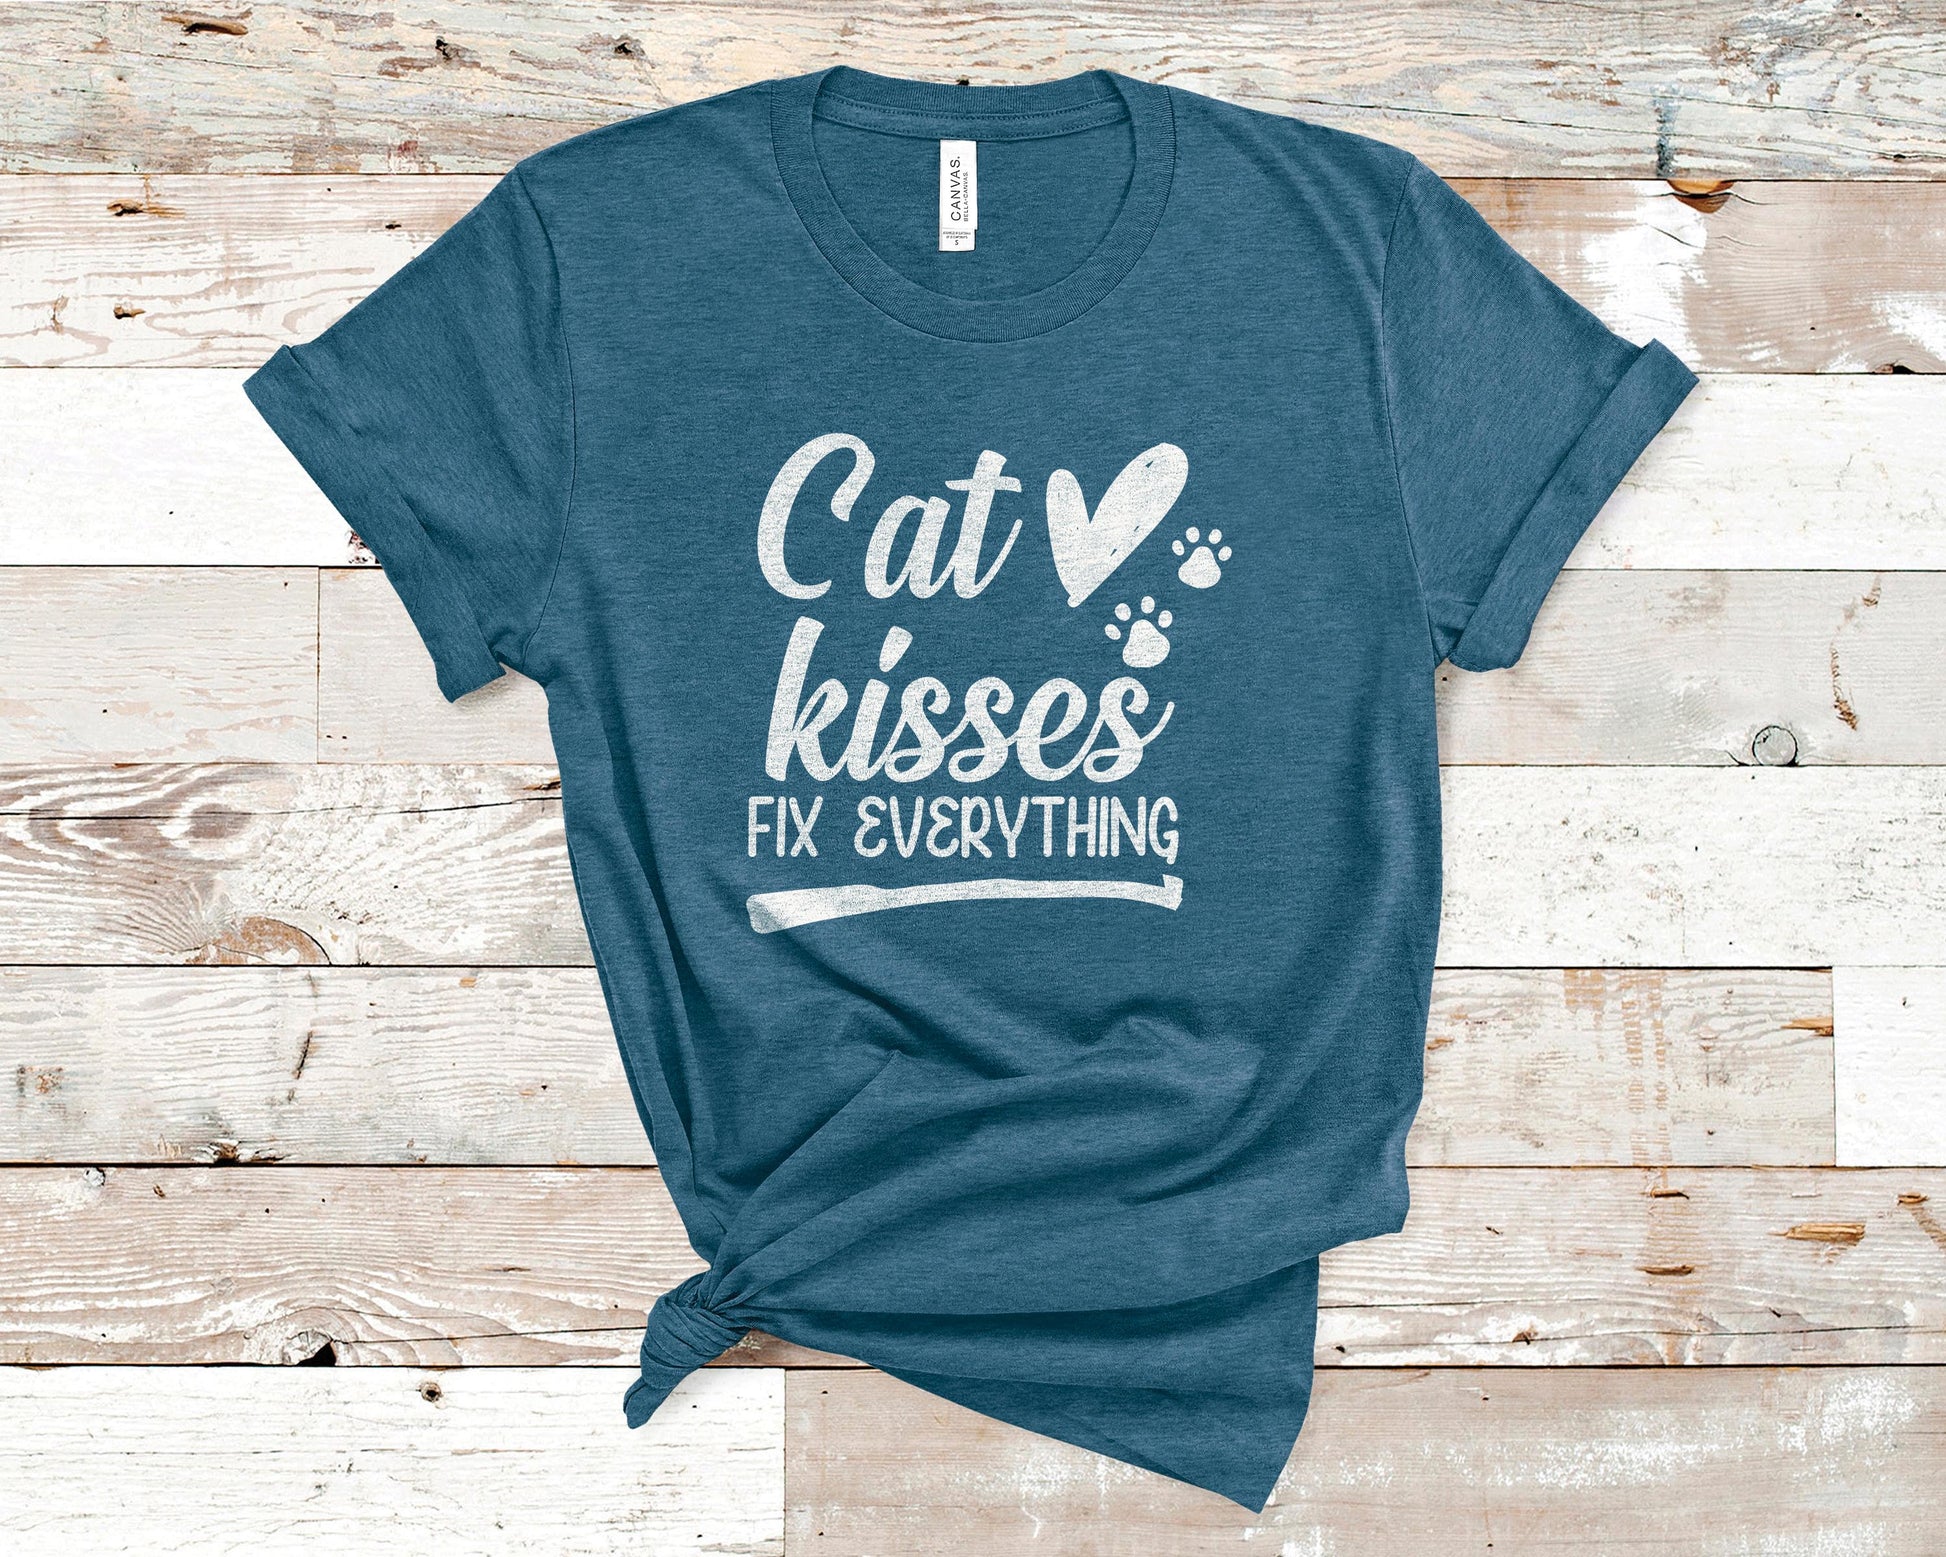 Pet Lovers Tees, Cat Lovers Shirts, Tshirt Gift for Pet Owners, Cat Design T-Shirt